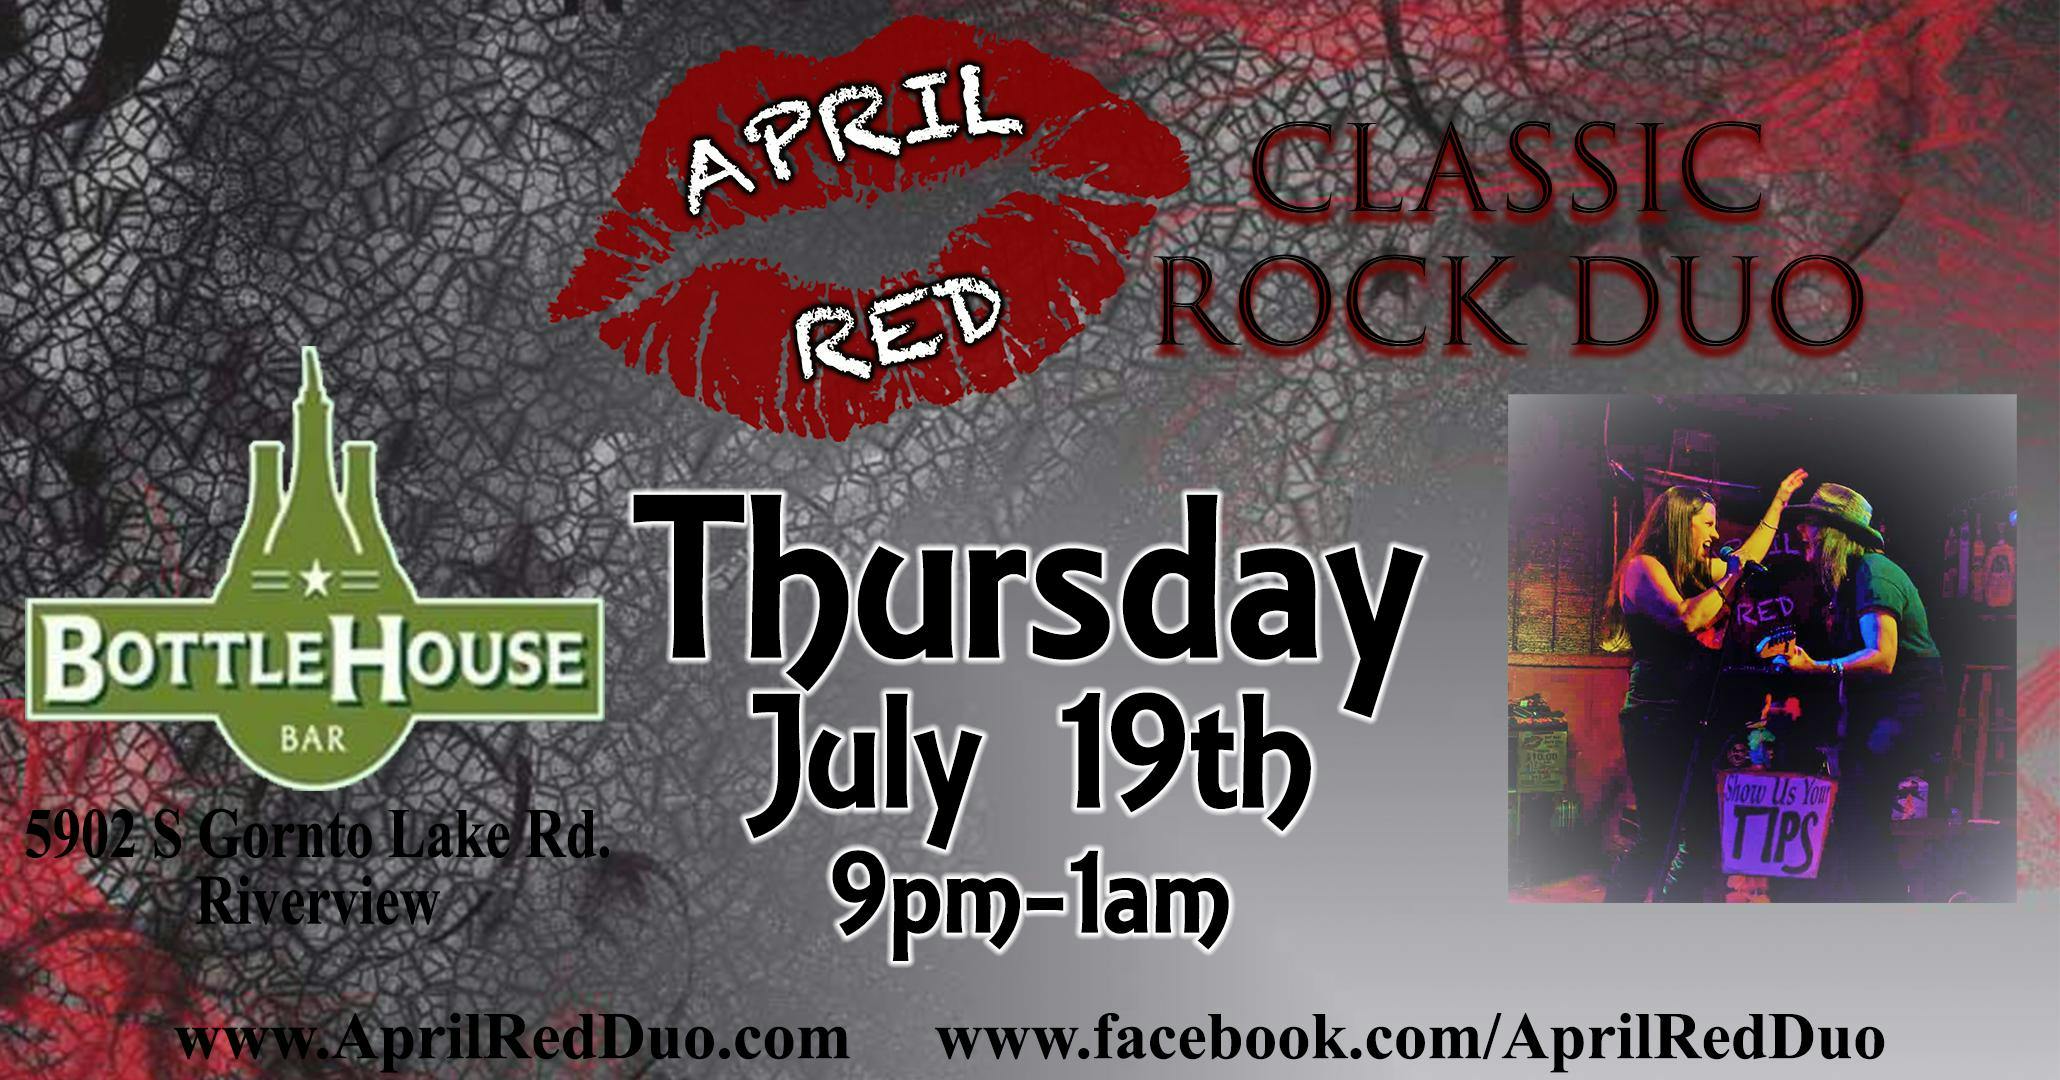 April Red debuts at The Bottle House Bar in Riverview!